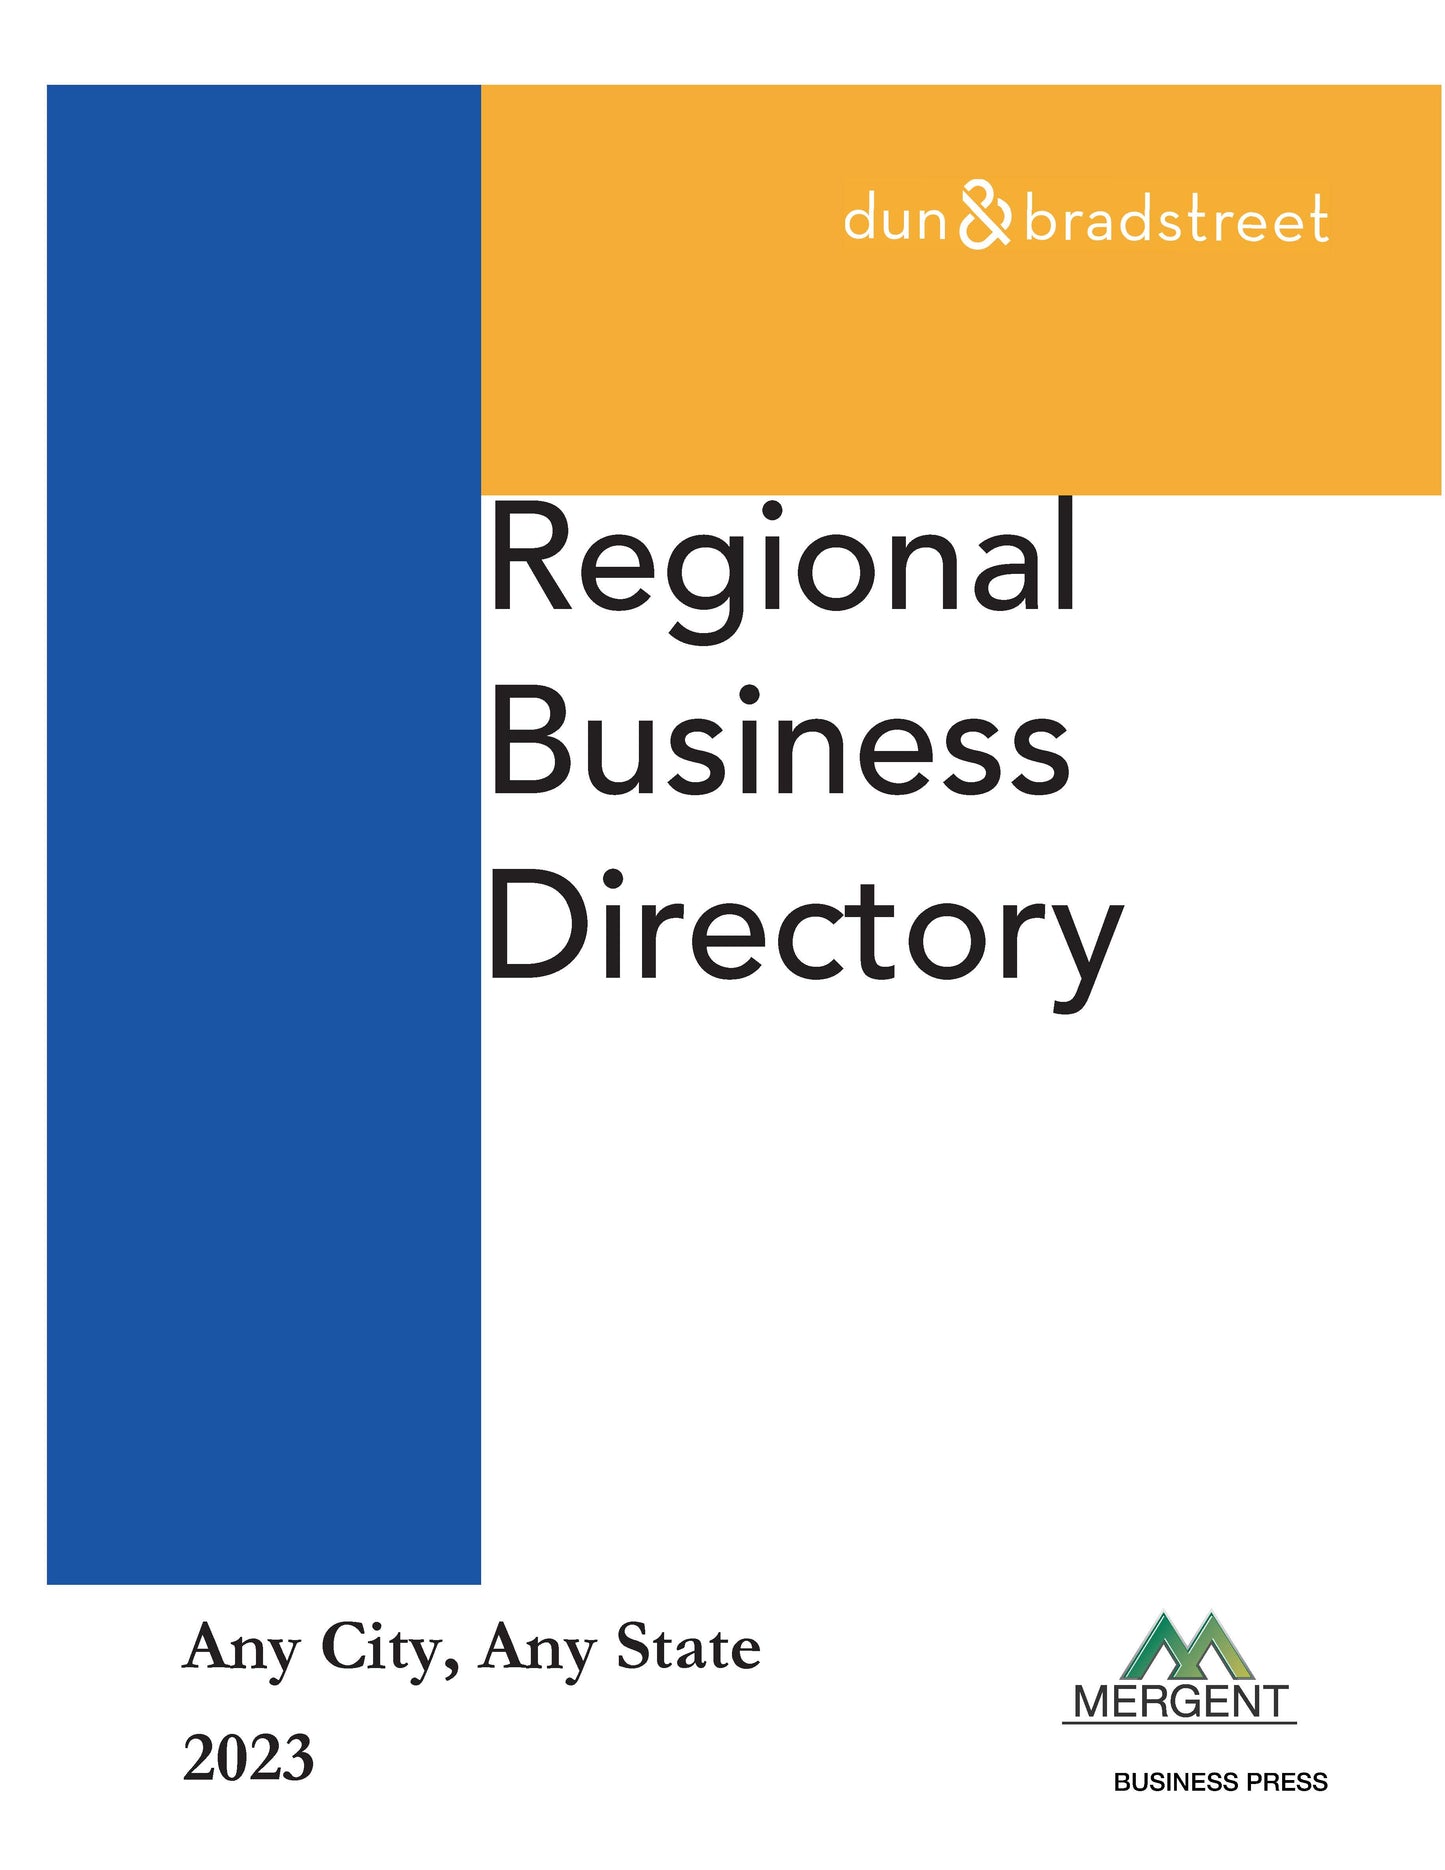 Regional Business Directory - Chicago Suburb